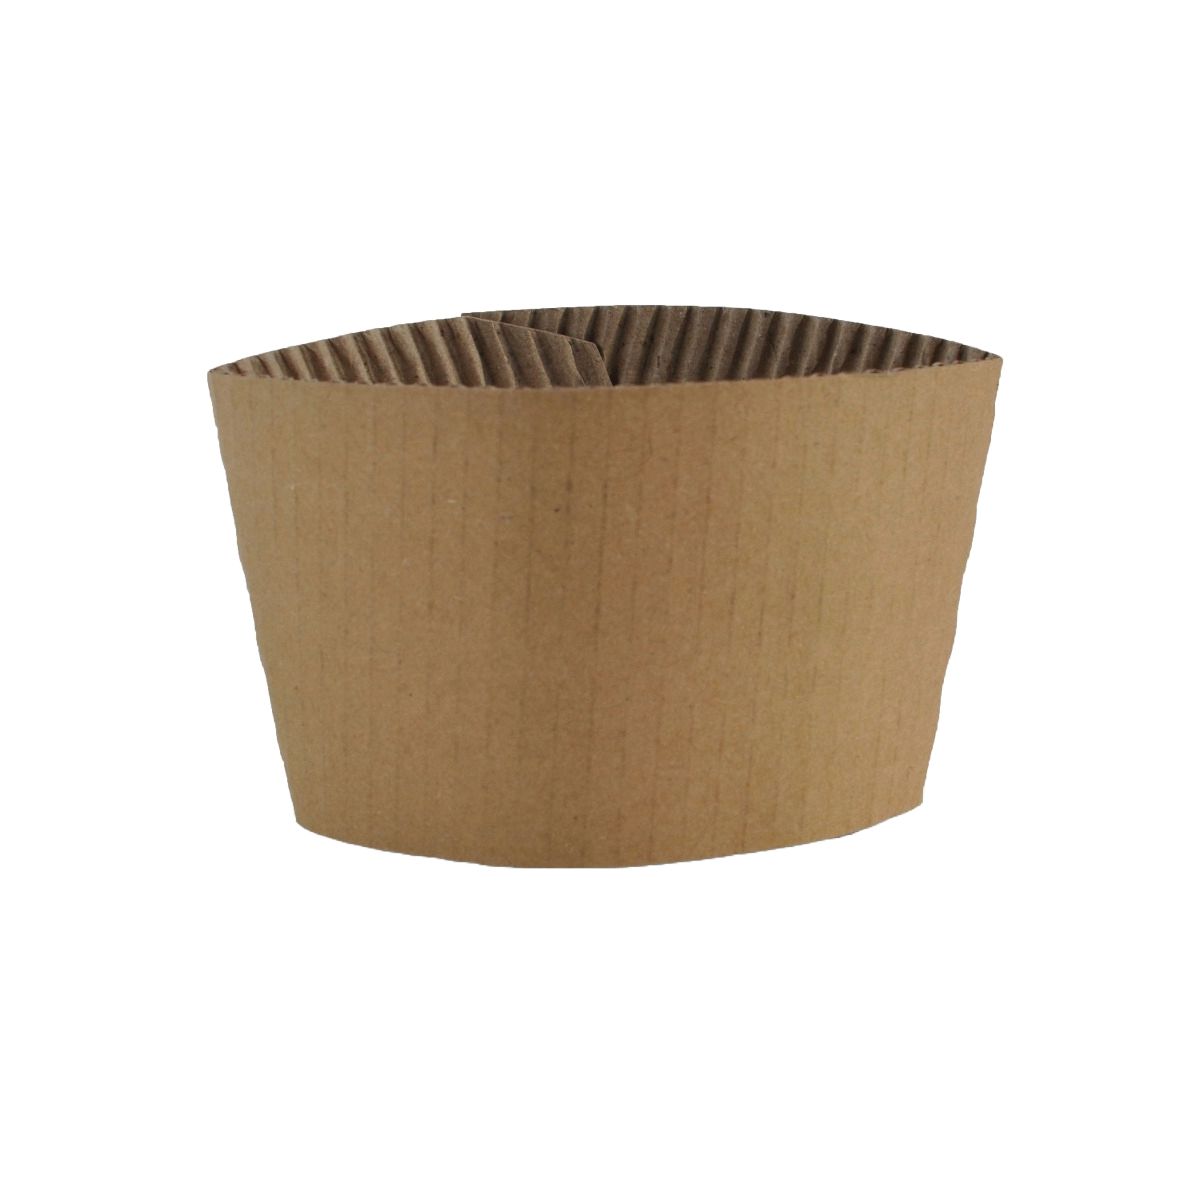 Sleeve for 10-24 oz Hot Cup | Recycled Kraft Paper | Compostable | 1000/case - Stalk Market